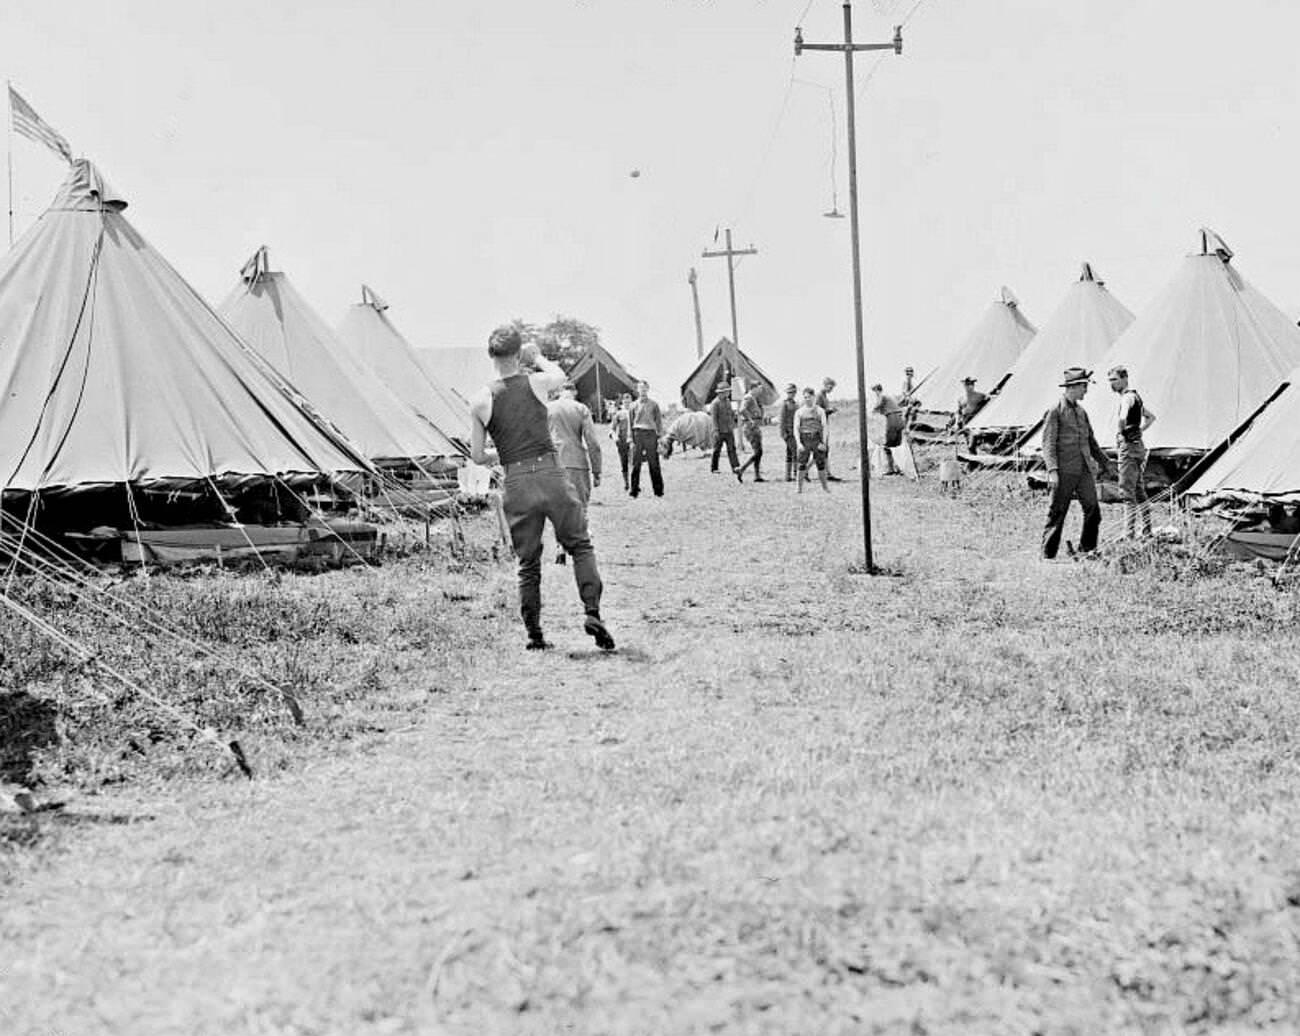 Ball Game In Camp At Fort Hamilton, Brooklyn, 1908